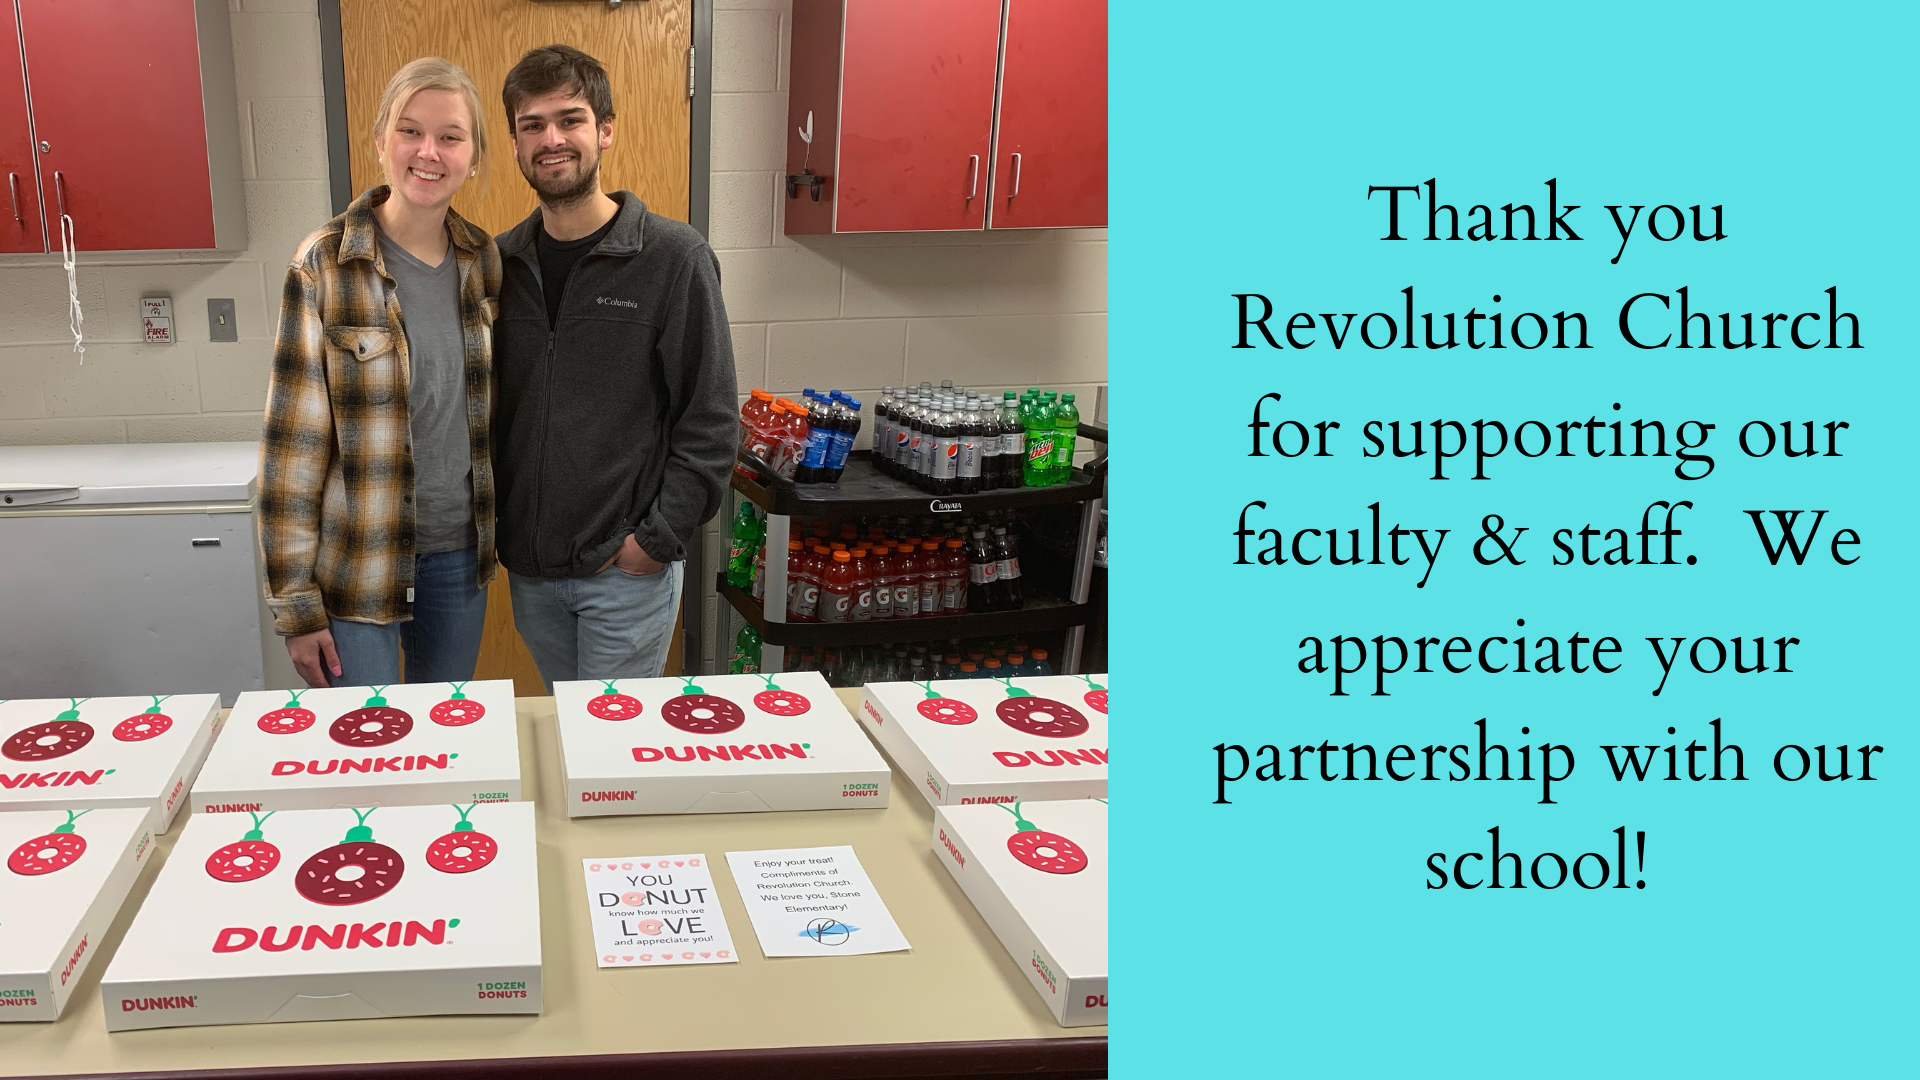 Revolution Church provides donuts to faculty and staff 